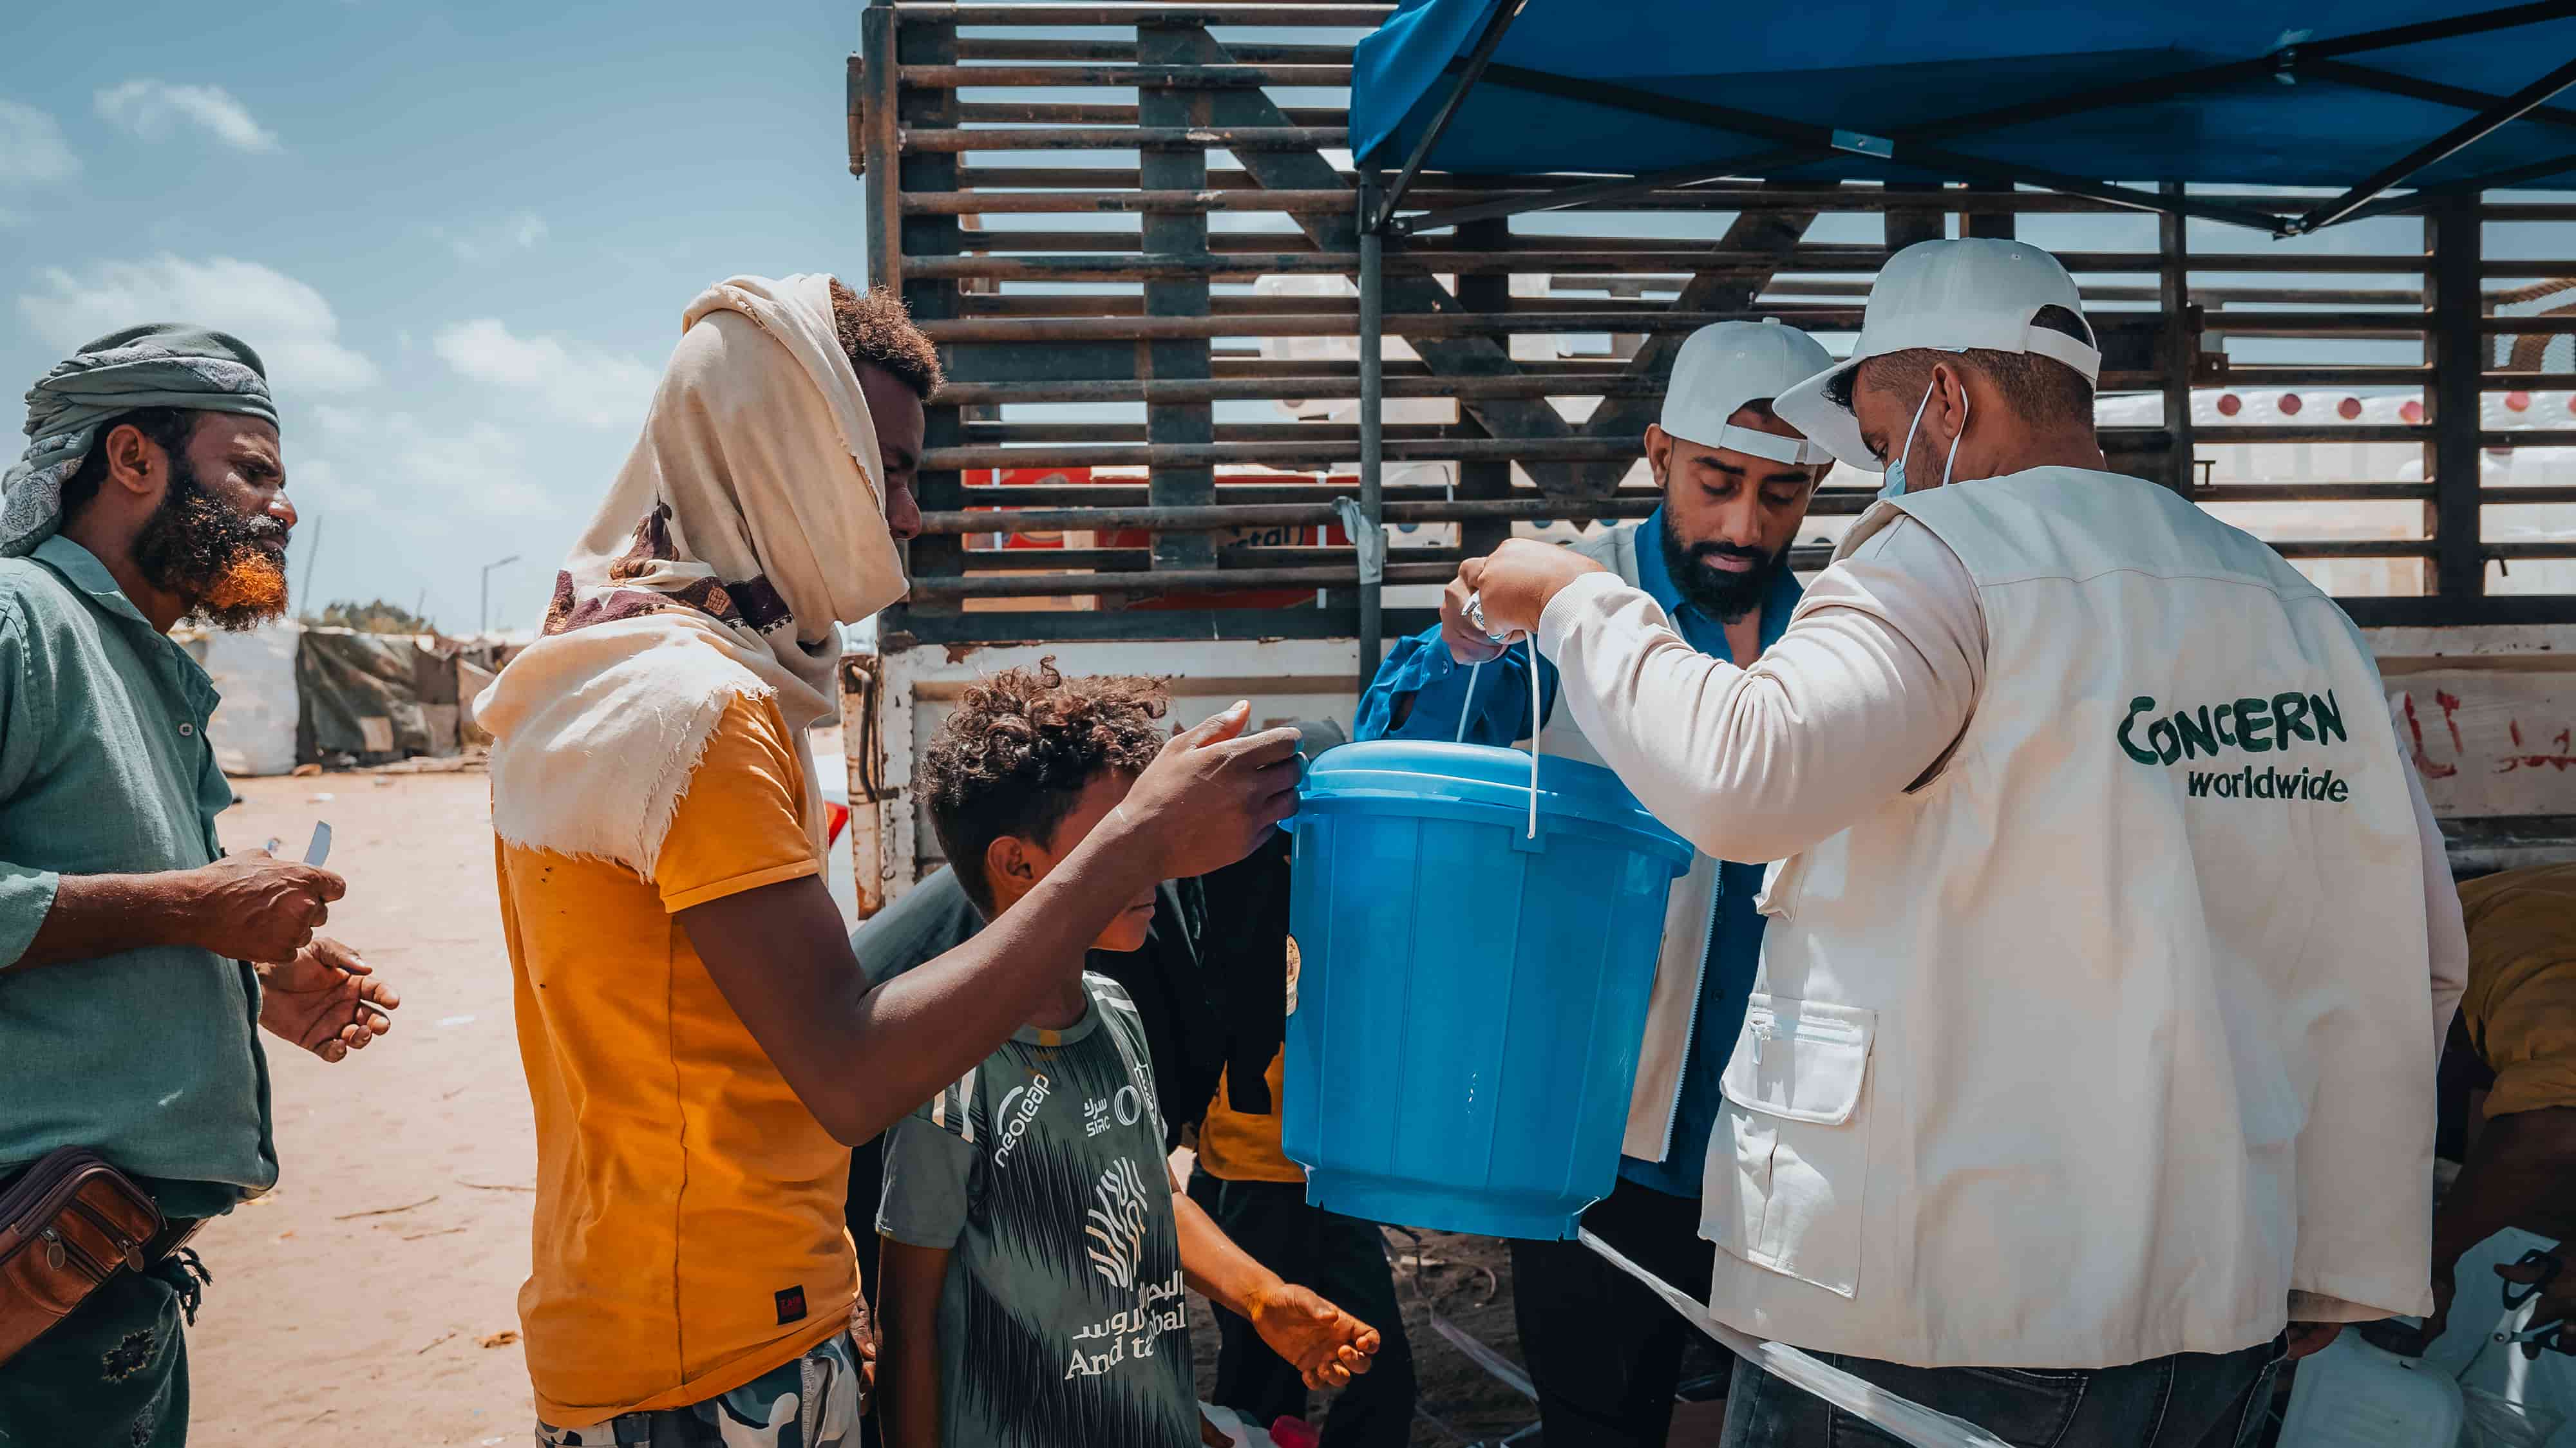 Concern staff in Yemen distribute buckets and hygiene kits to affected families in displacement camps in Yemen.